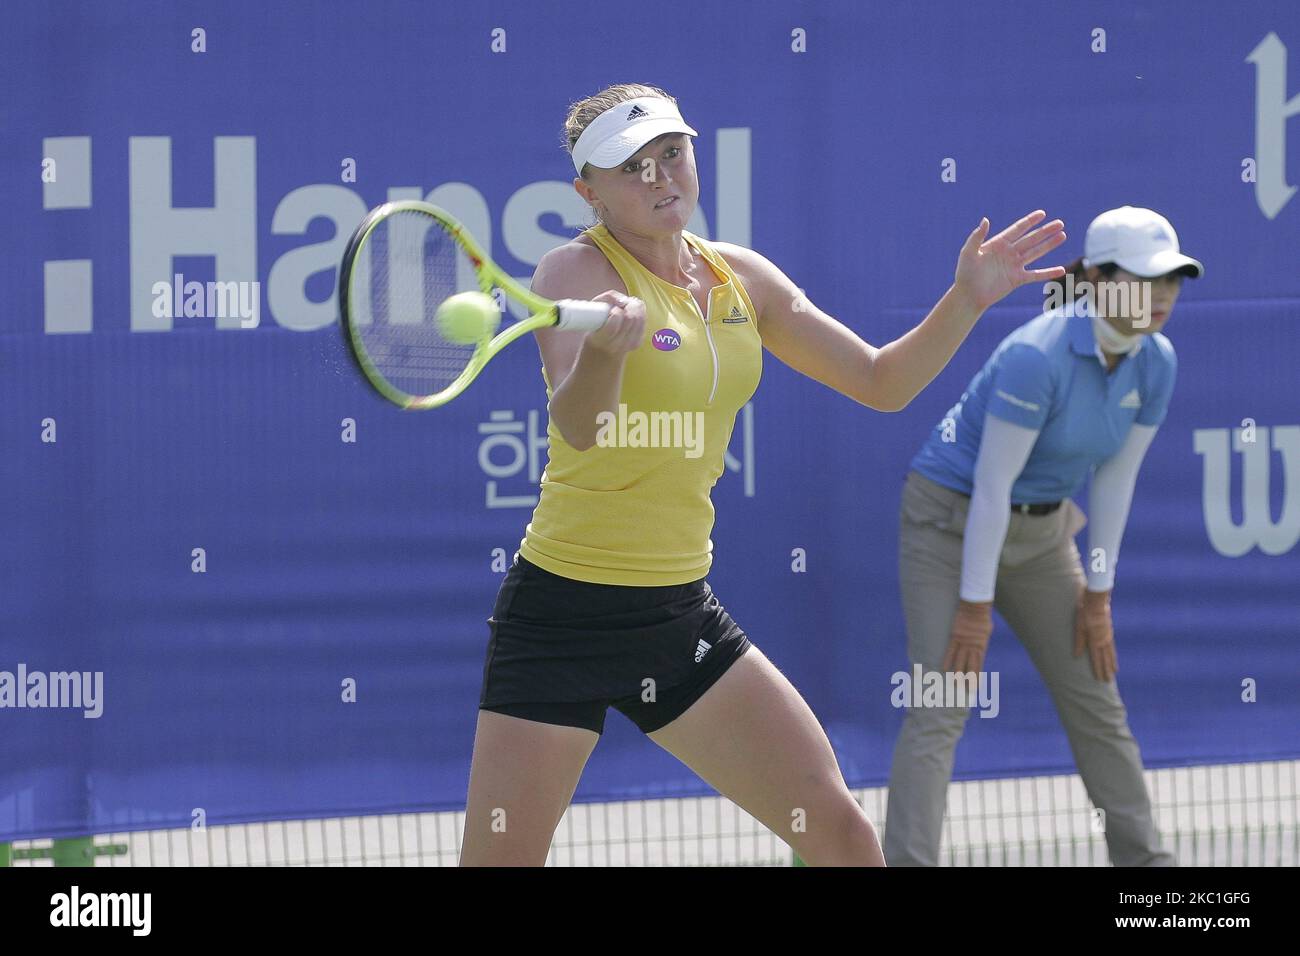 Aliaksandra Sasnovich of BLR and Magdalena Rybarikova of SVK play a match during the WTA Korea Open Third Round at Olympic Park Tennis Court in Seoul, South Korea on September 24, 2015. Aliaksandra Sasnovich Match won score by 6-3,6-3. (Photo by Seung-il Ryu/NurPhoto) Stock Photo